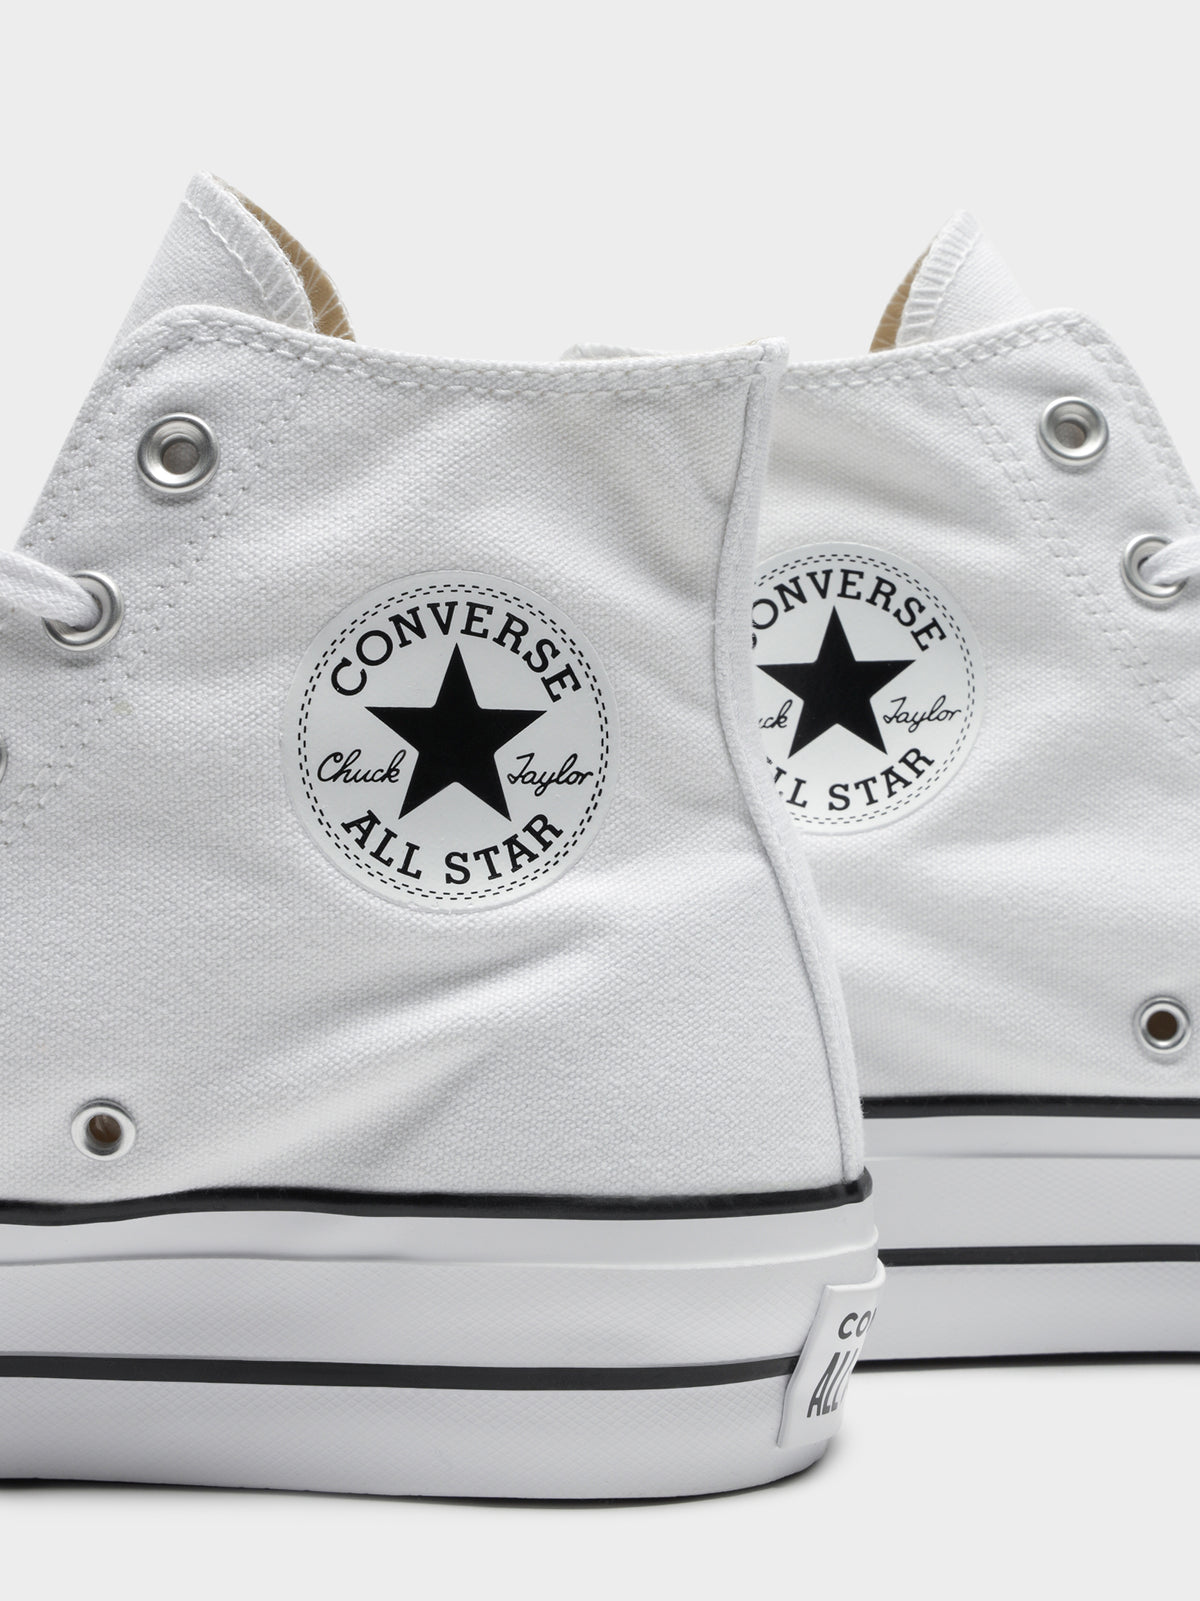 Womens Chuck Taylor All Star Lift Canvas Sneakers in White